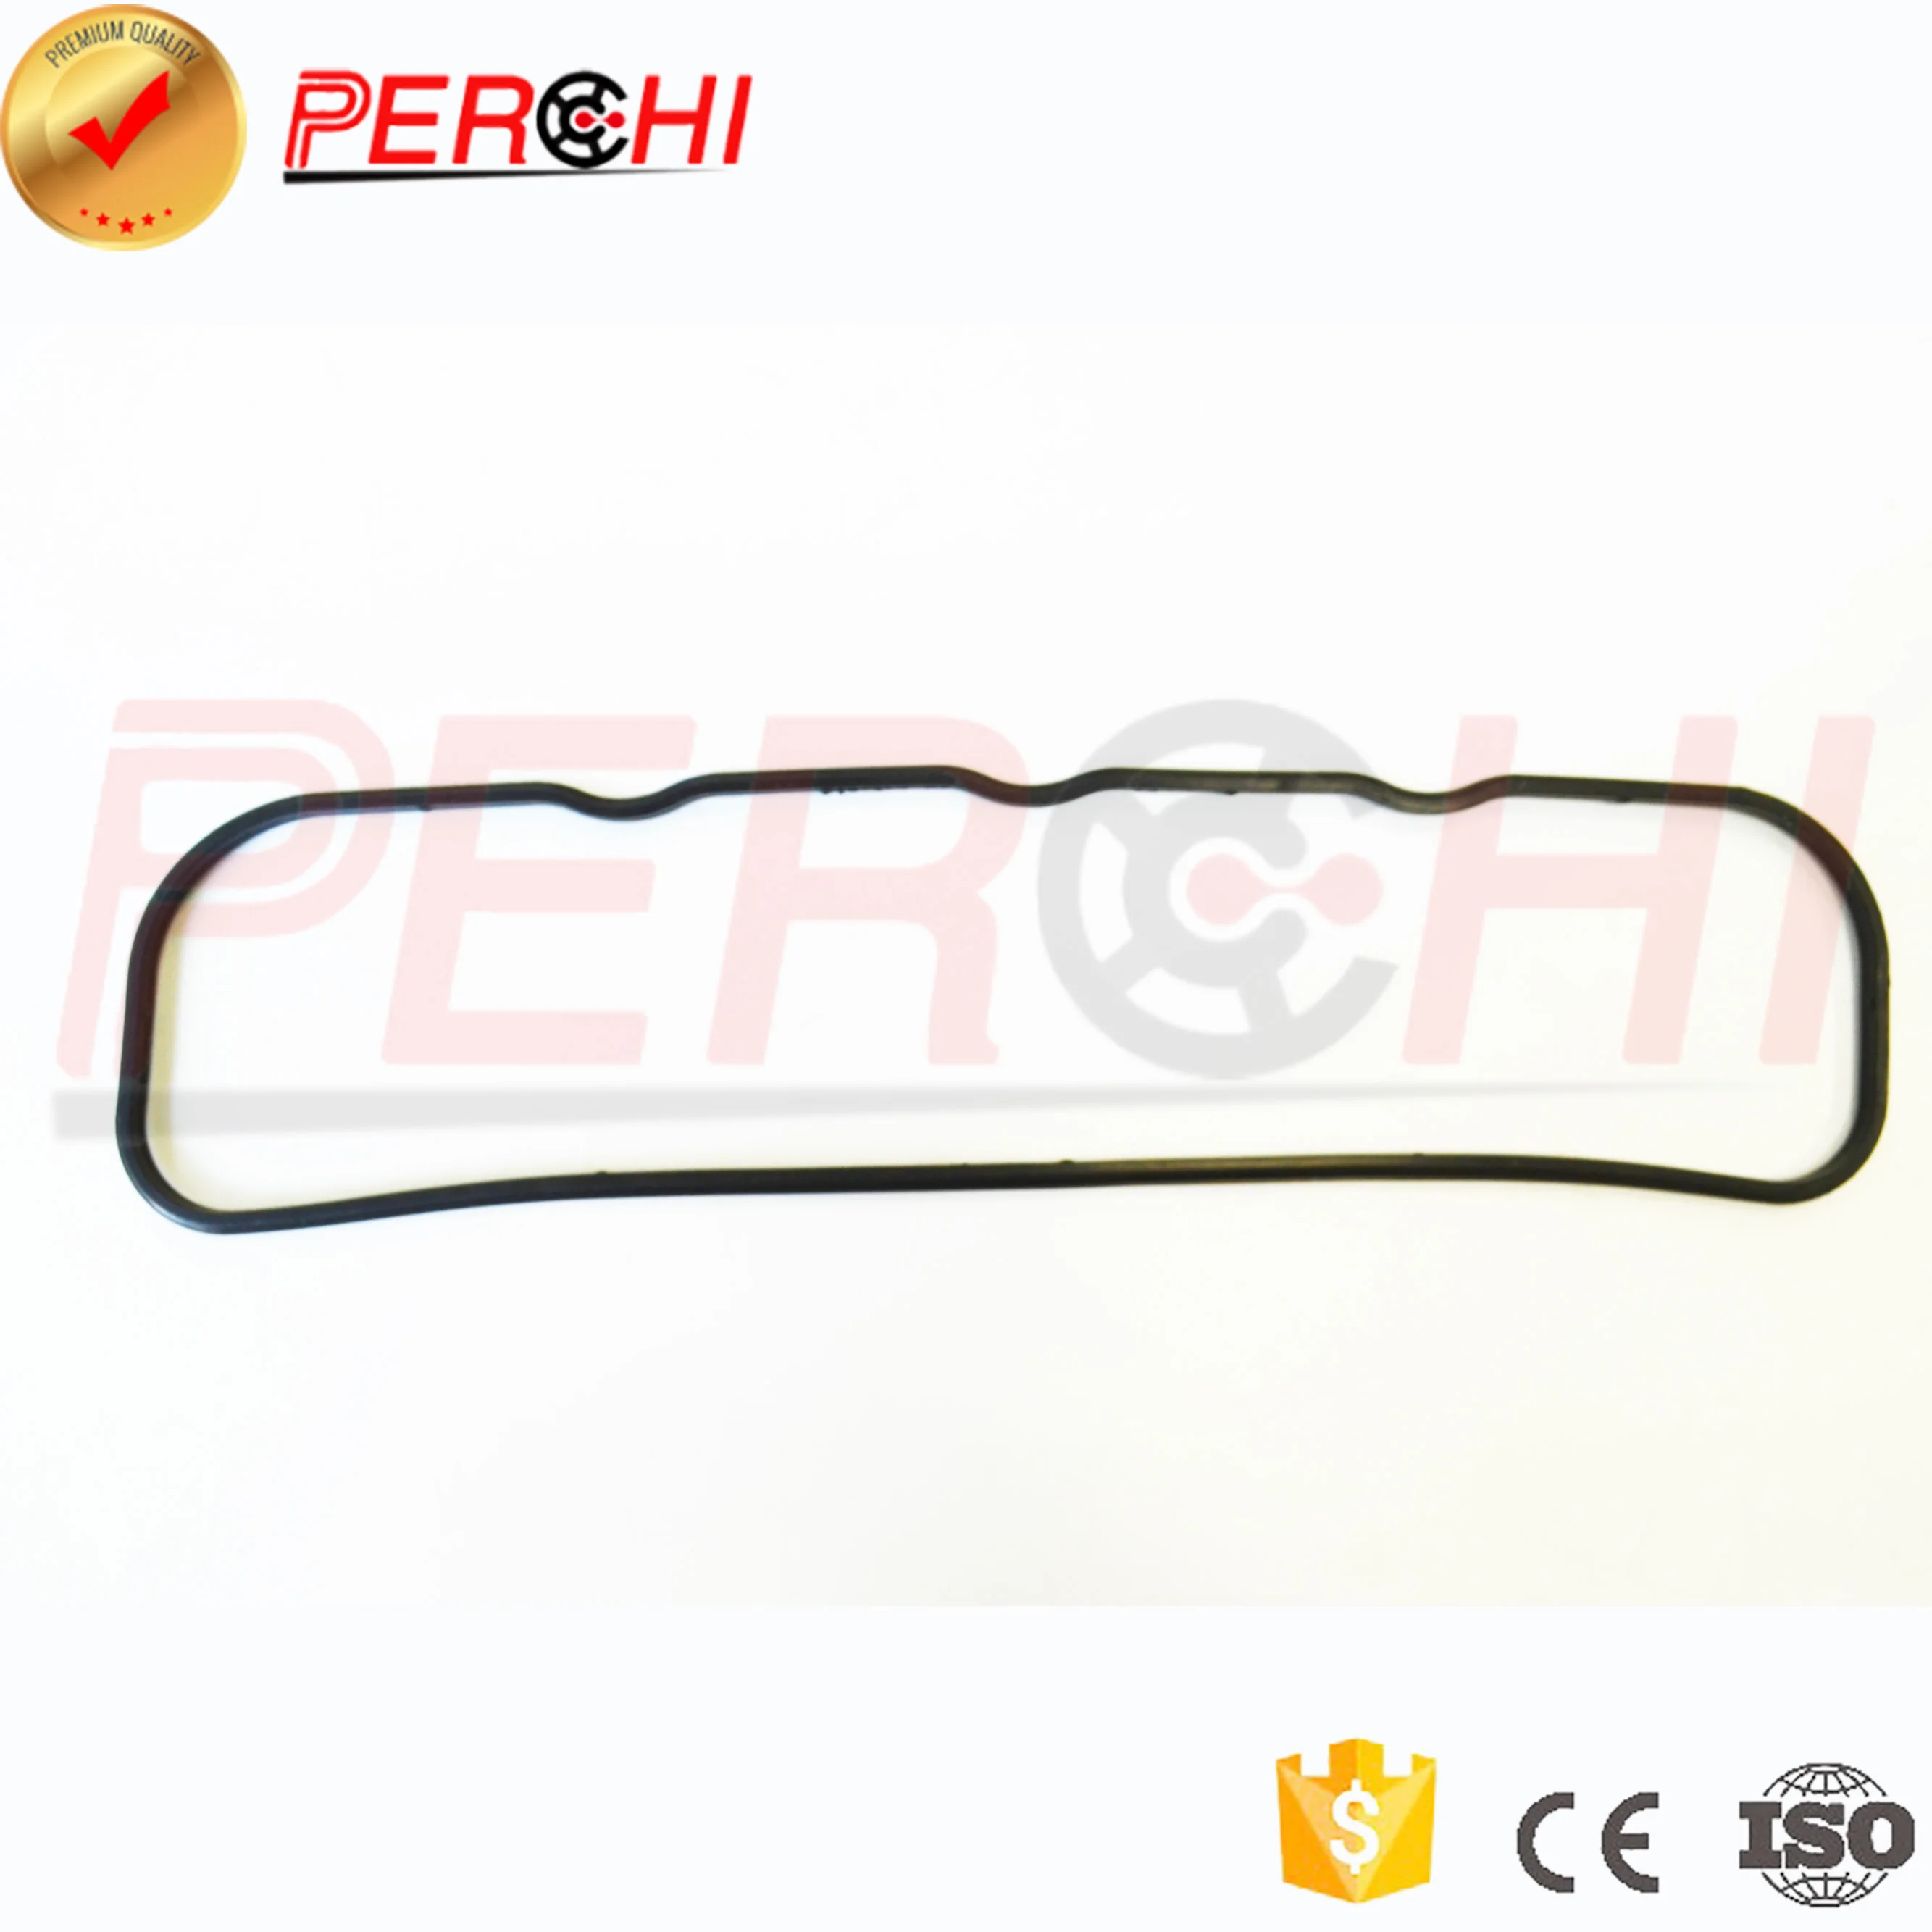 

Valve Cover Gasket for Toyota Cassidy Van 2Y 3Y 4Y HIACE III Box HILUX IV Pickup LITEACE Box MASTER ACE SURF Bus 1.8 11213-71020